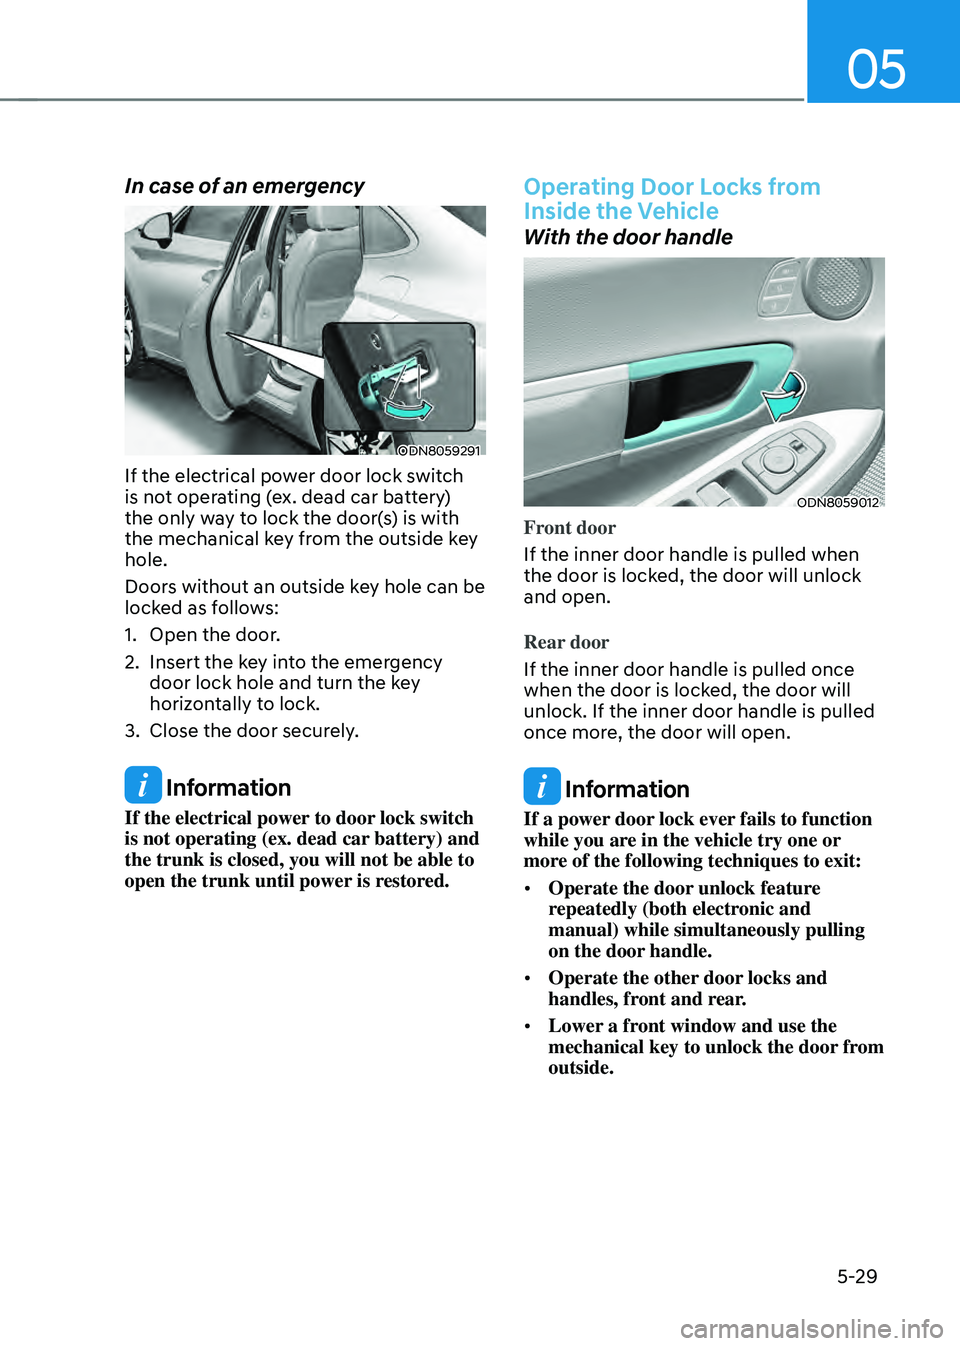 HYUNDAI SONATA HYBRID 2022 User Guide 05
5-29
In case of an emergency 
ODN8059291
If the electrical power door lock switch 
is not operating (ex. dead car battery) 
the only way to lock the door(s) is with 
the mechanical key from the out